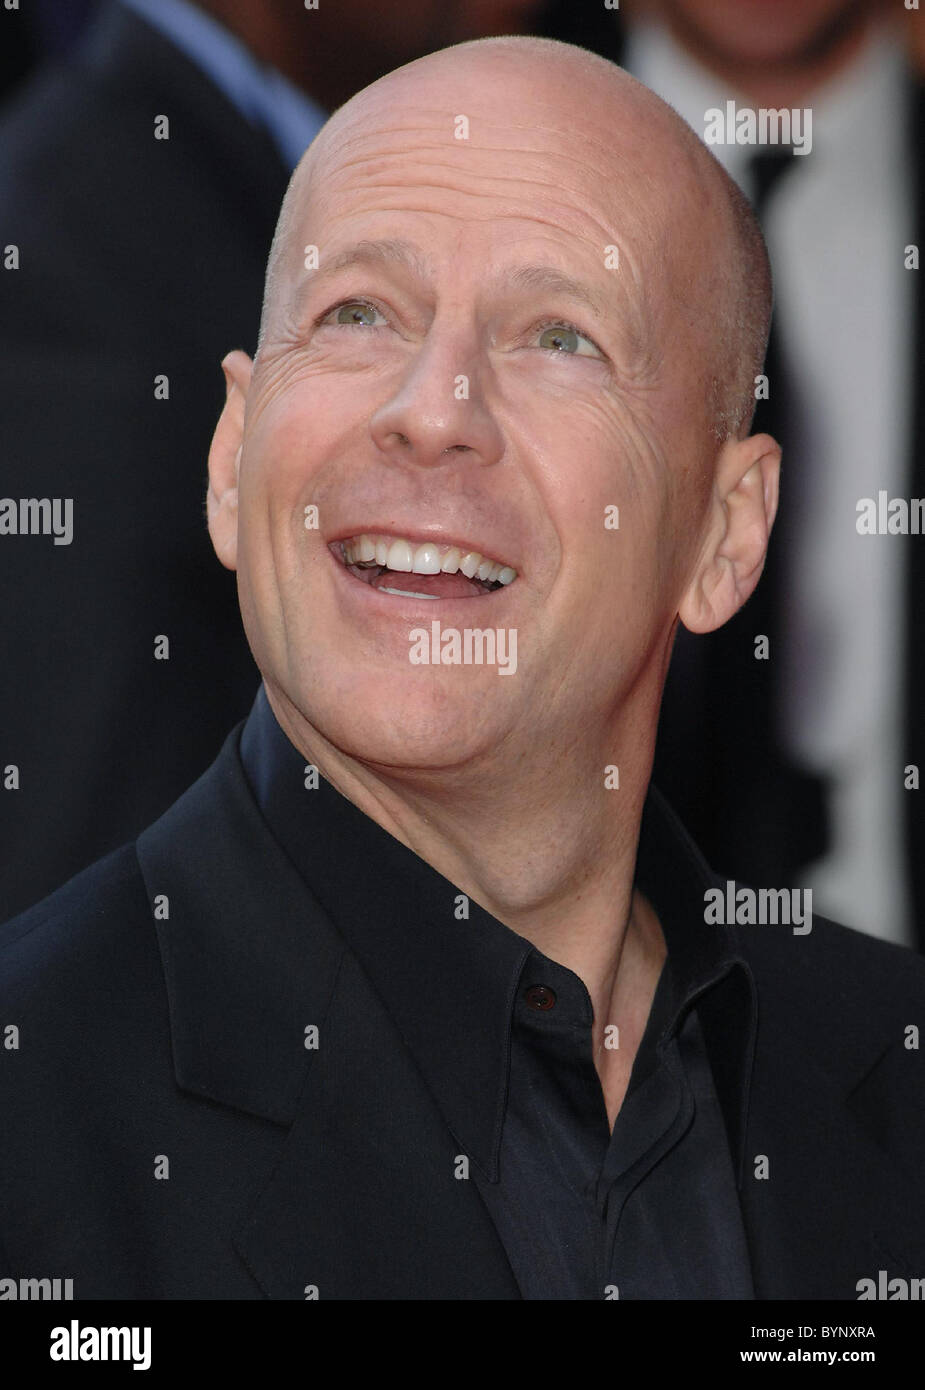 Bruce Willis UK Premiere of Die Hard 4.0 held at the Empire Liecester Square London, England - 20.06.07 : Stock Photo